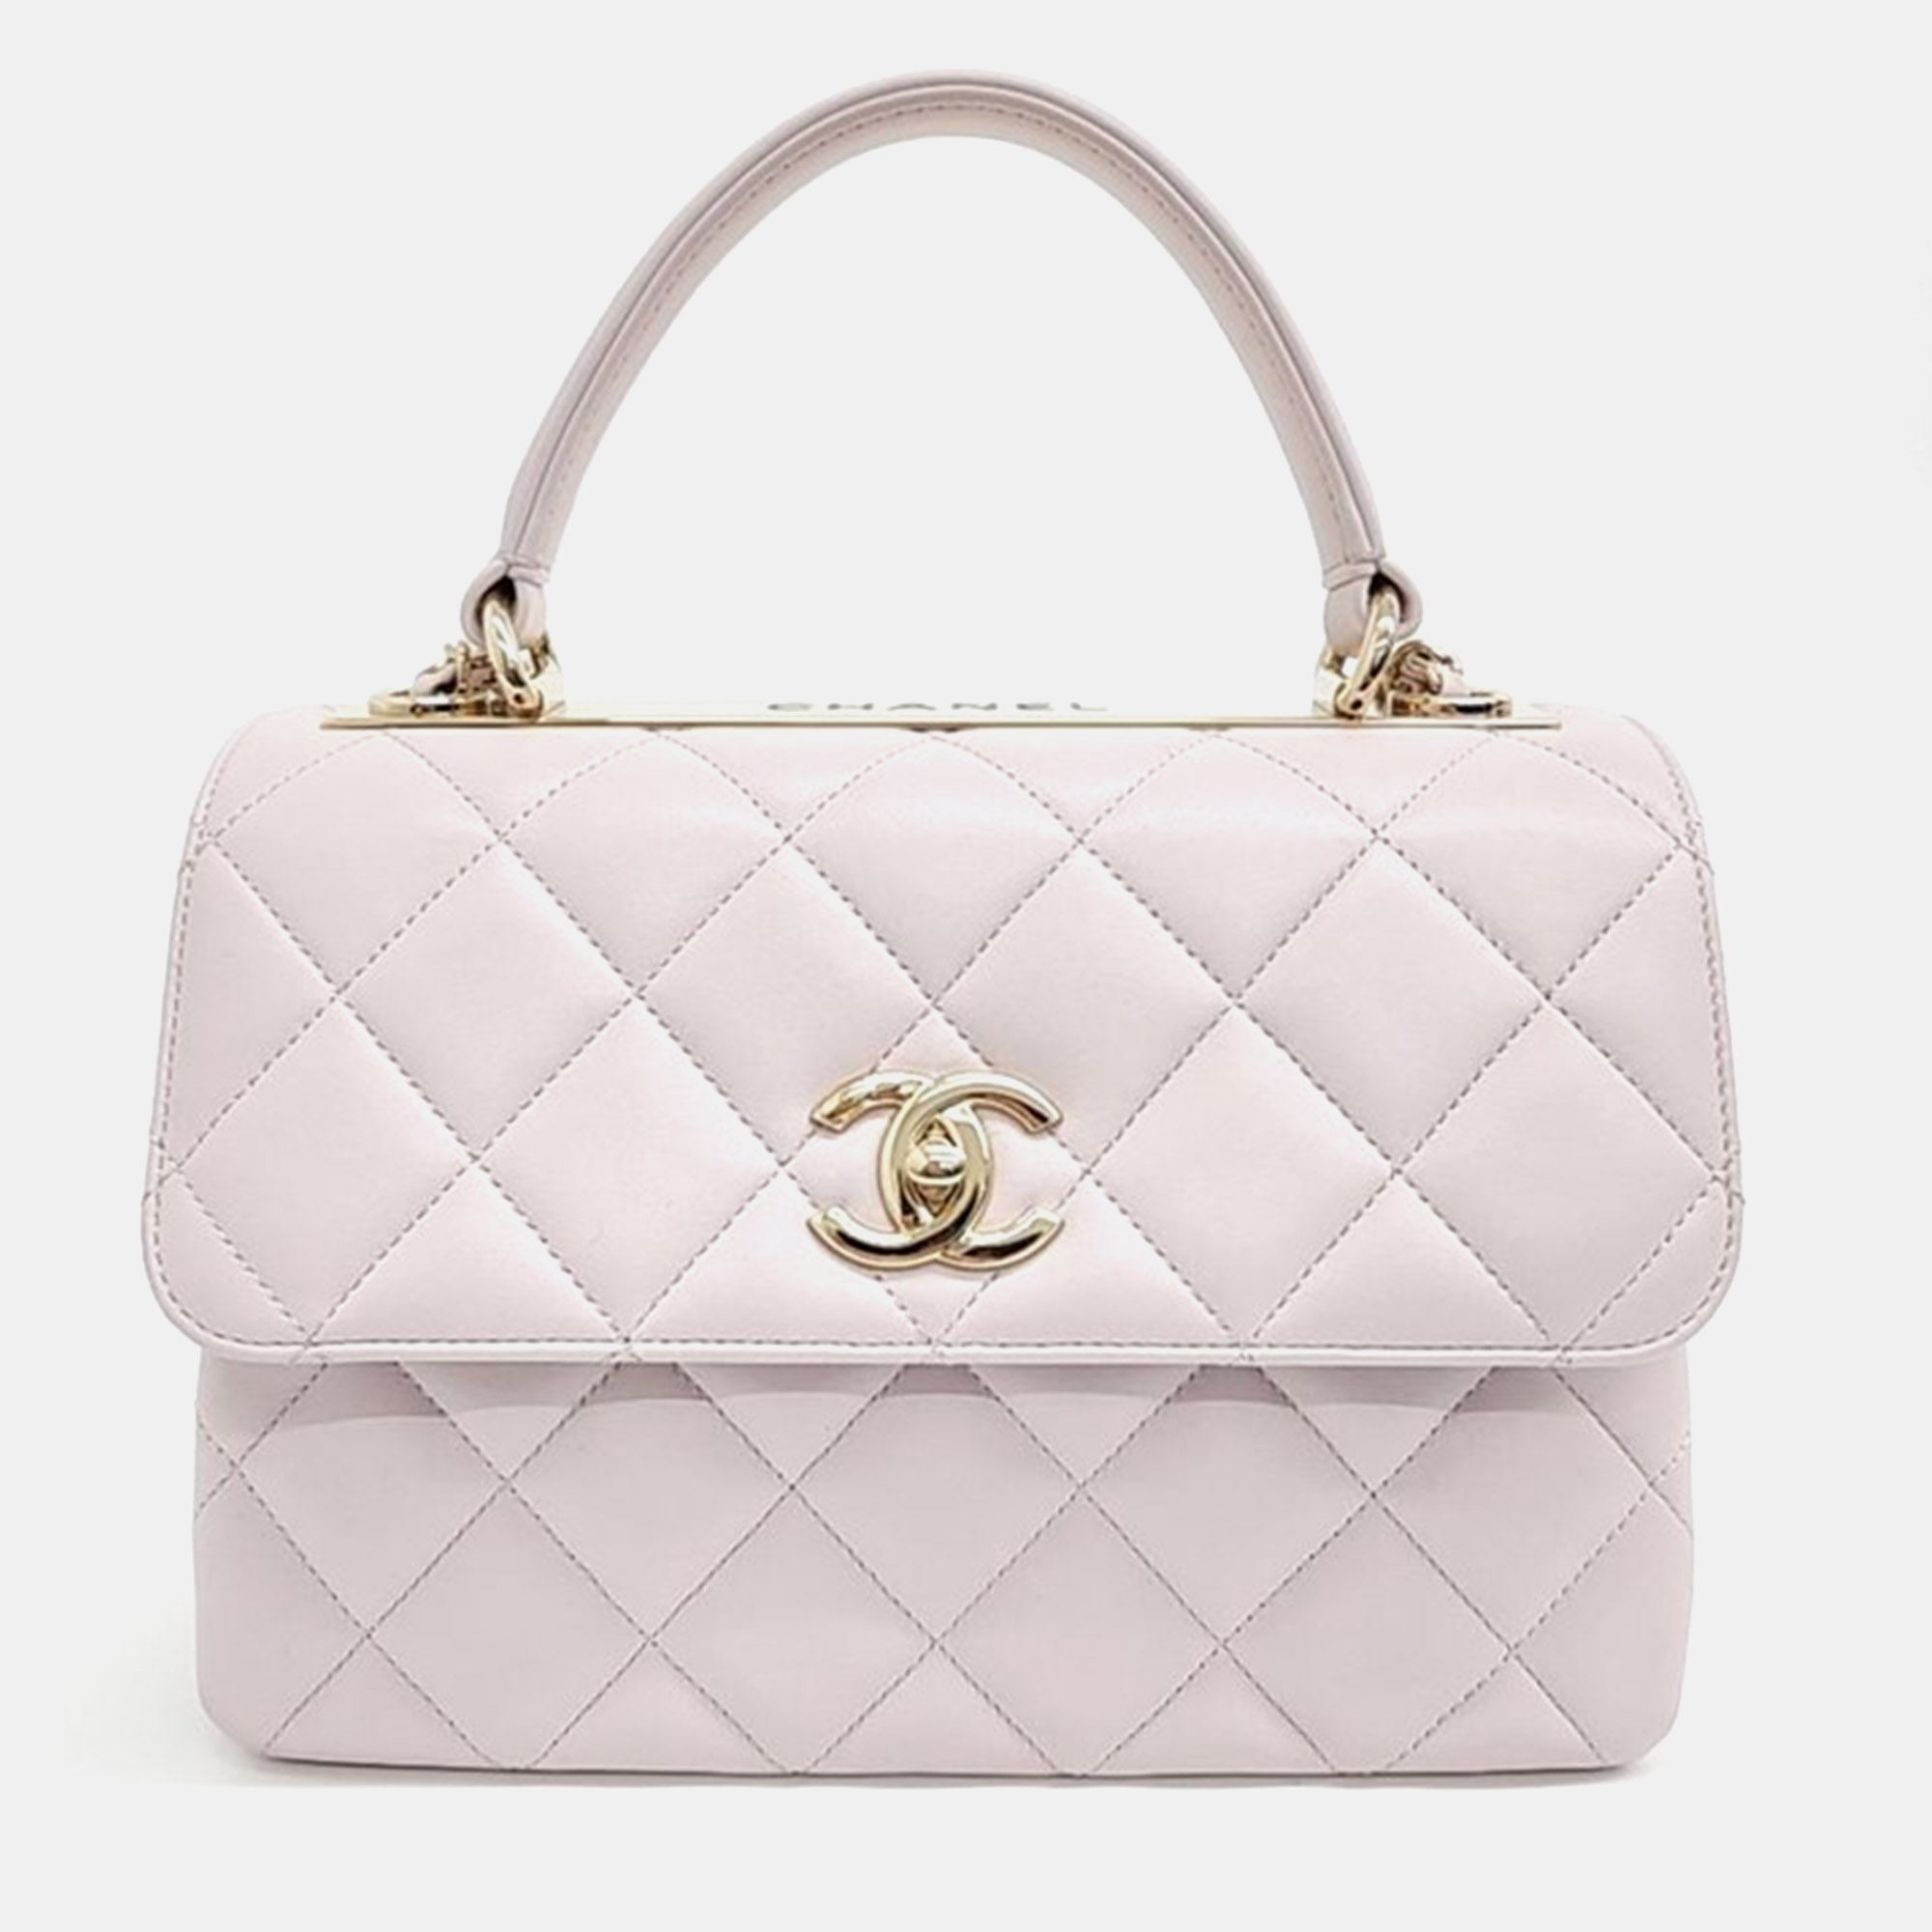 Chanel lilac leather small trendy flap bag